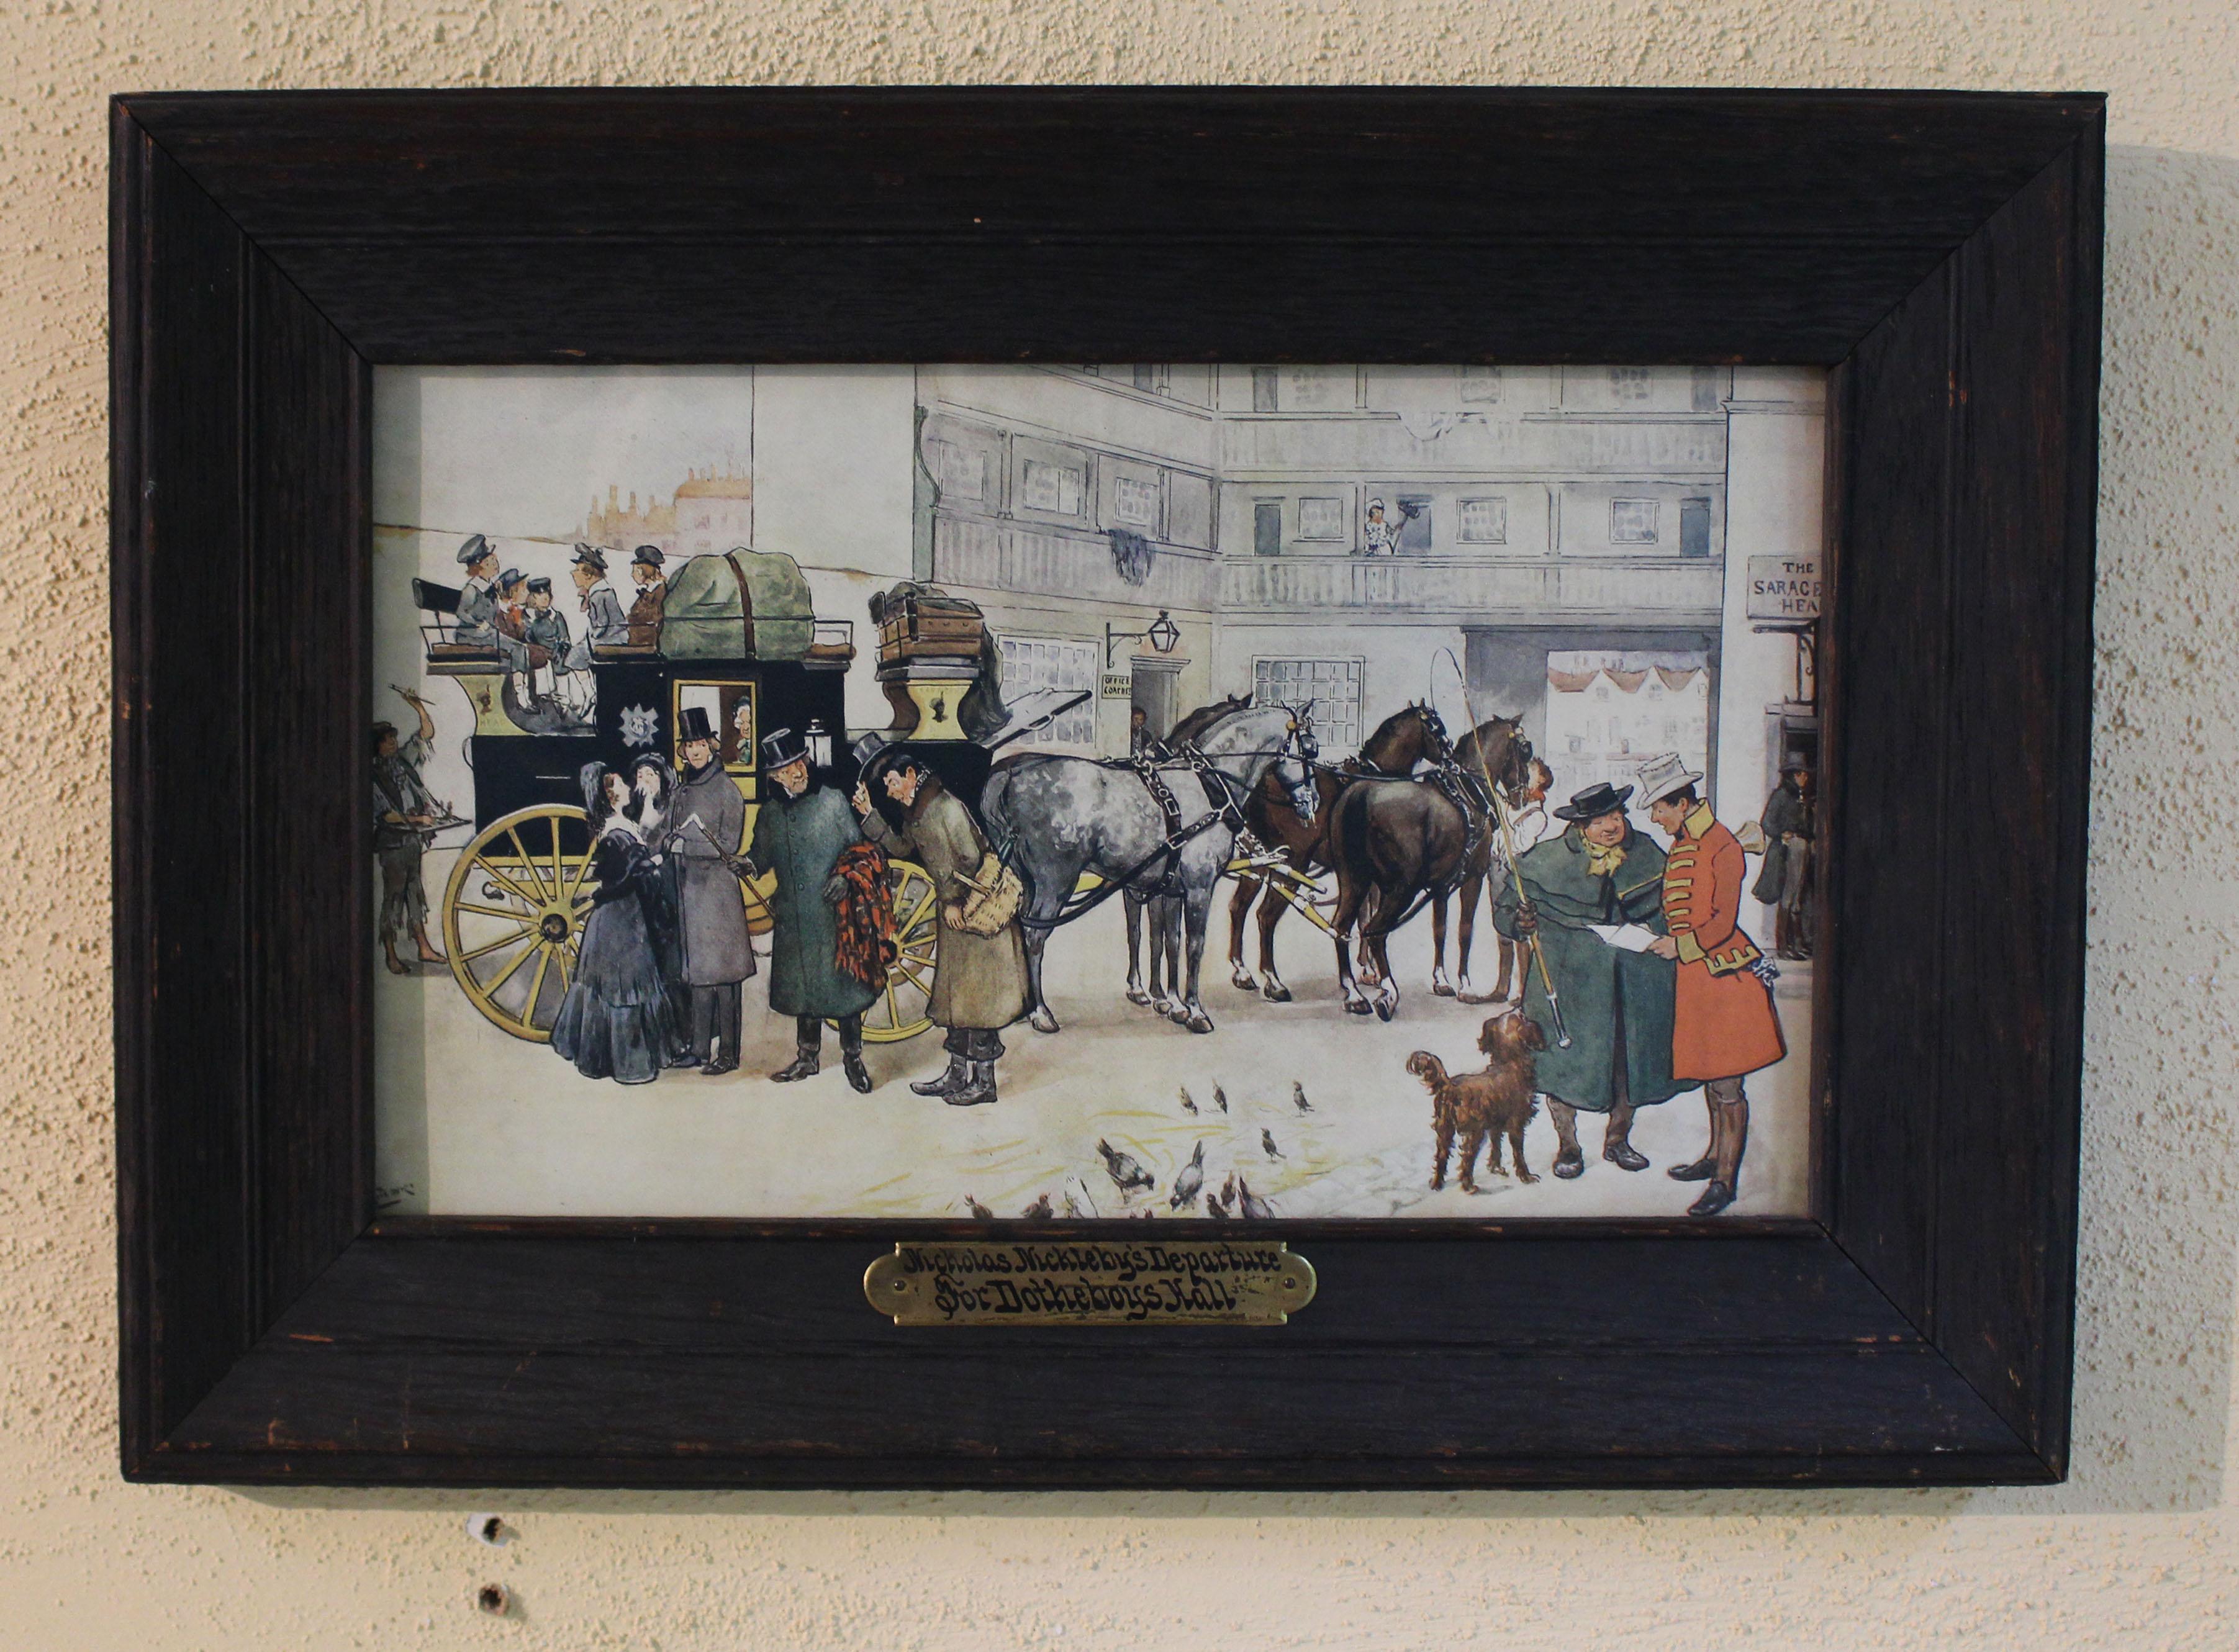 Nicholas Nickleby's Departure for Dotheboys Hall print from the 1902 series by Raphael Tuck & Sons, London. Artist: Albert Ludovici, Jr. (1820-1894), he was commissioned by Raphael Tuck & Sons to paint a series of 16 paintings portraying coaching